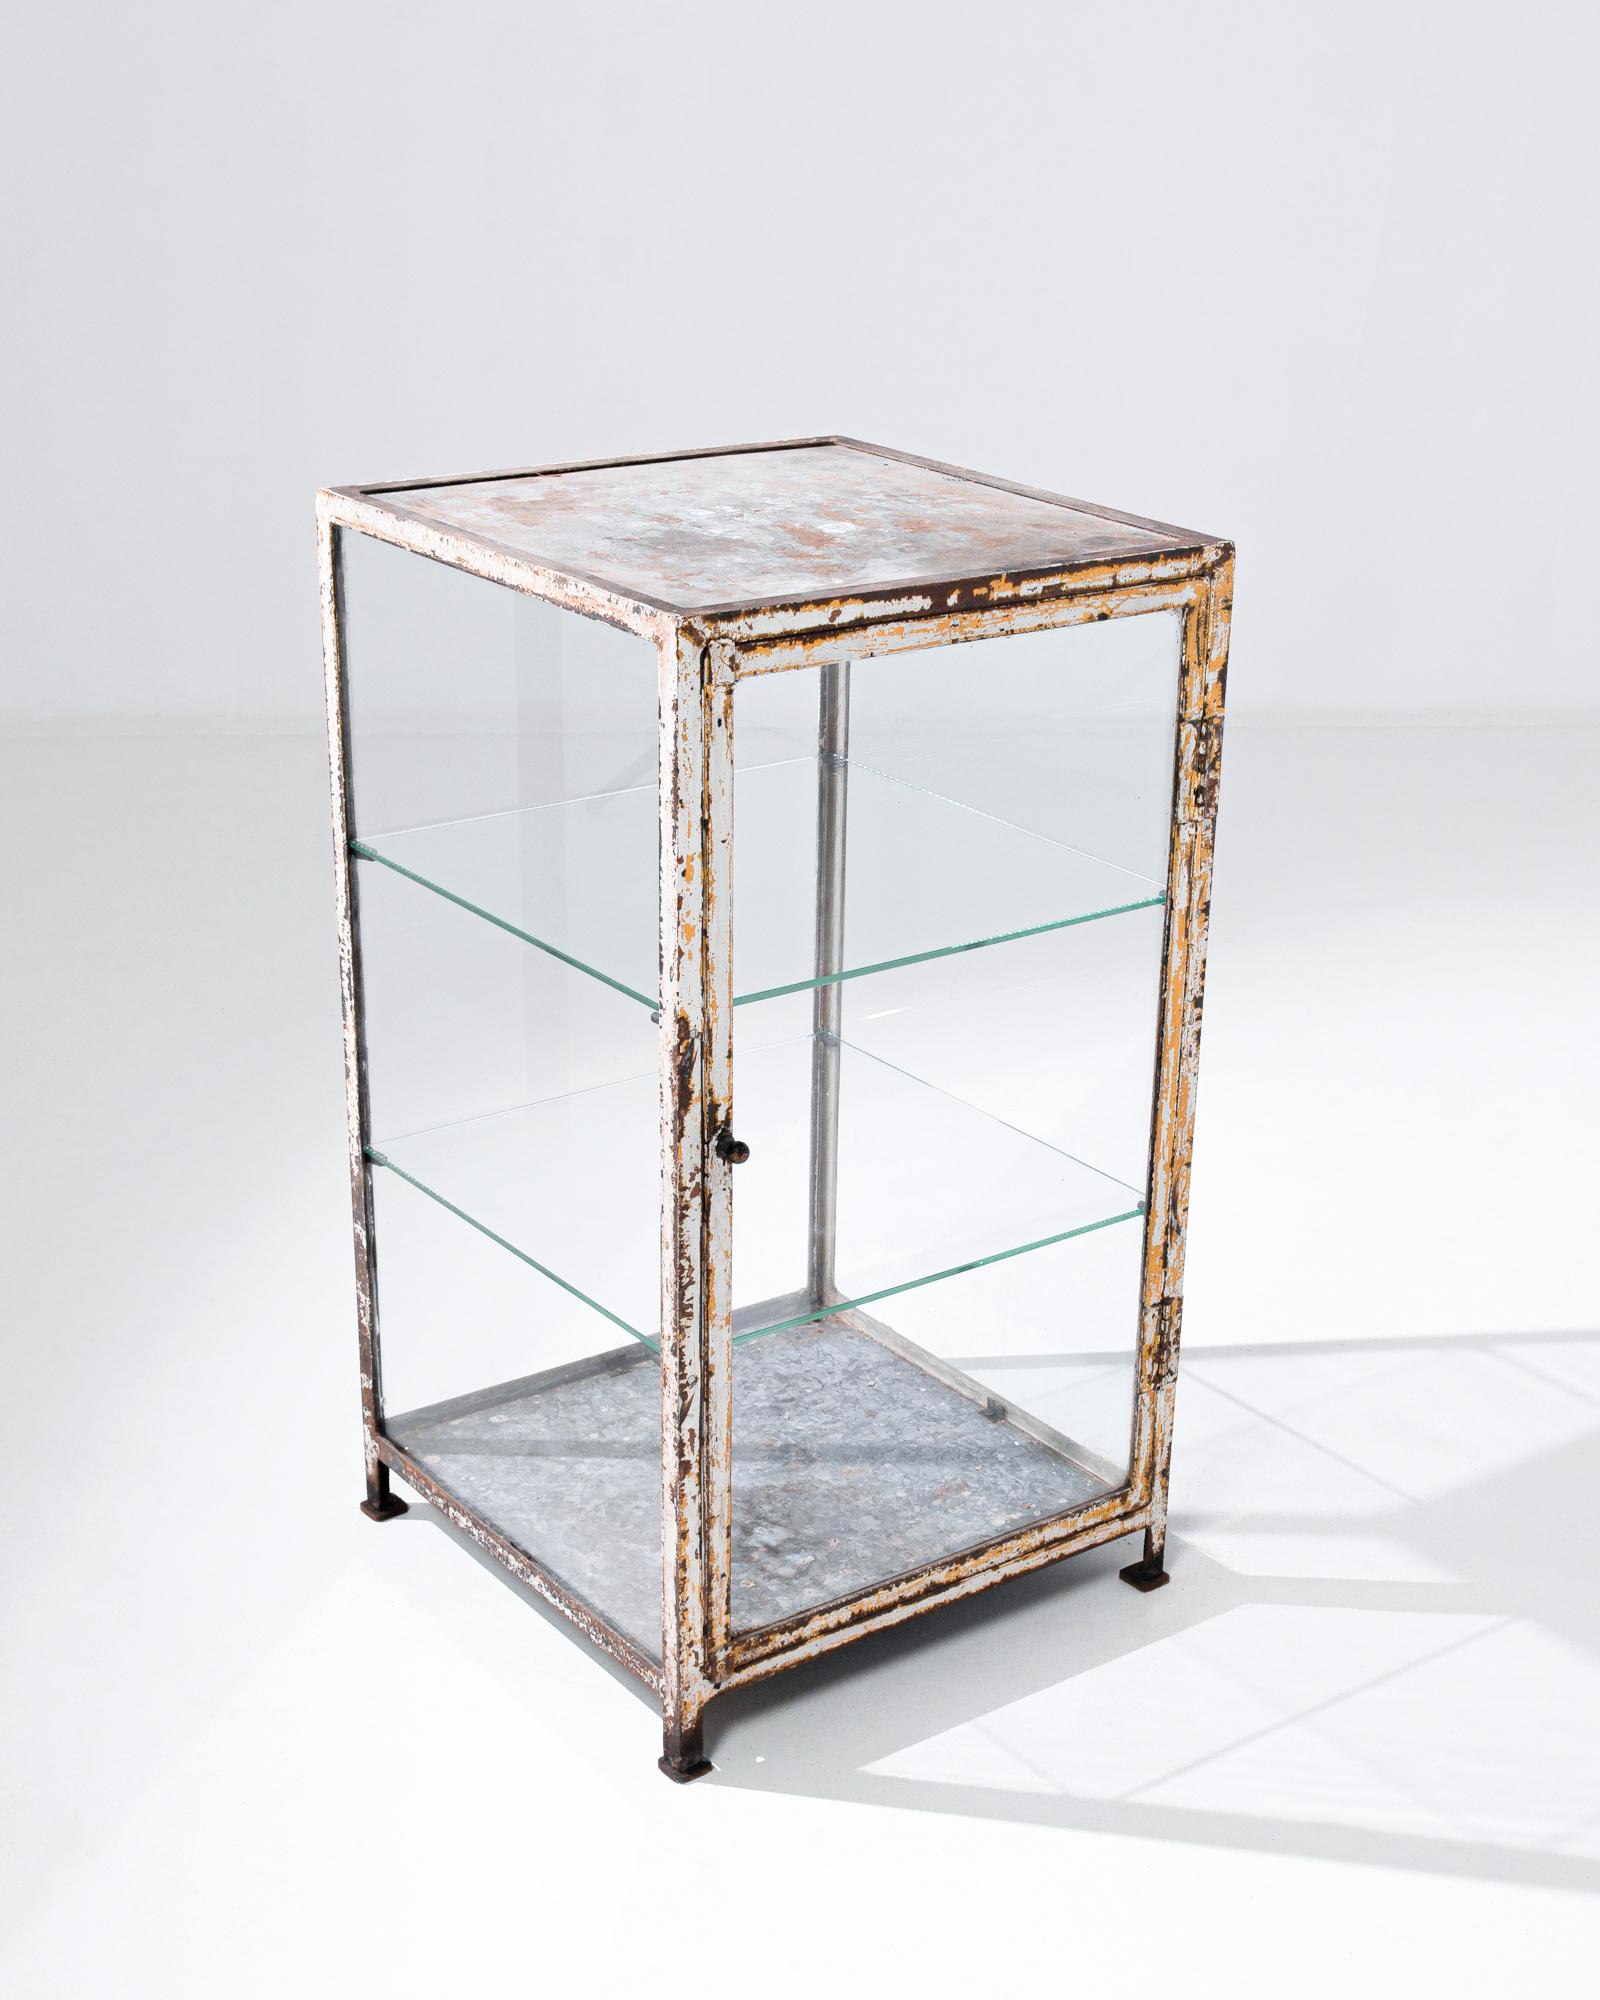 Made in France in the beginning of the 20th century, this two foot six inch tall, one and a half foot wide vitrine features glass walls outlined by the coarse metal frame. Two transparent glass shelves add an extra dimensional feel. Enlivened with